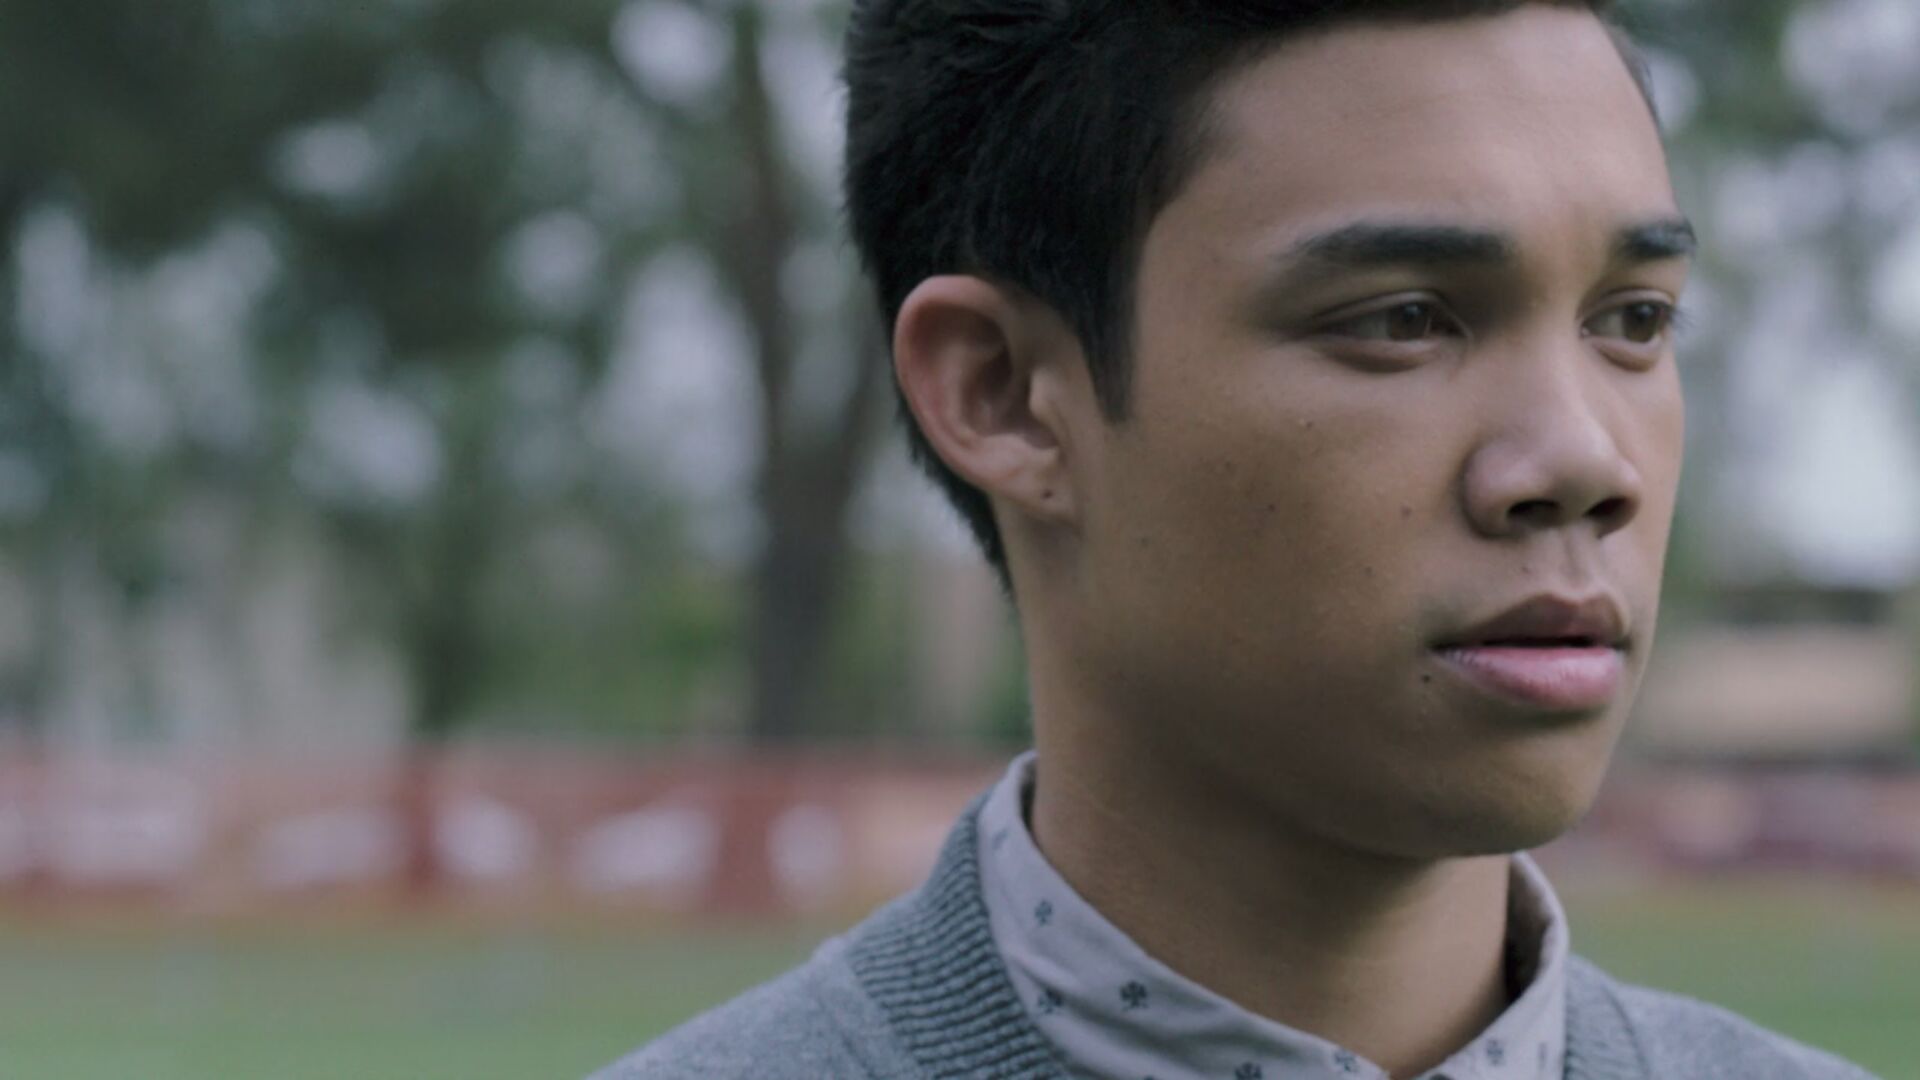 Roshon Fegan in Mostly Ghostly: Have You Met My Ghoulfriend?